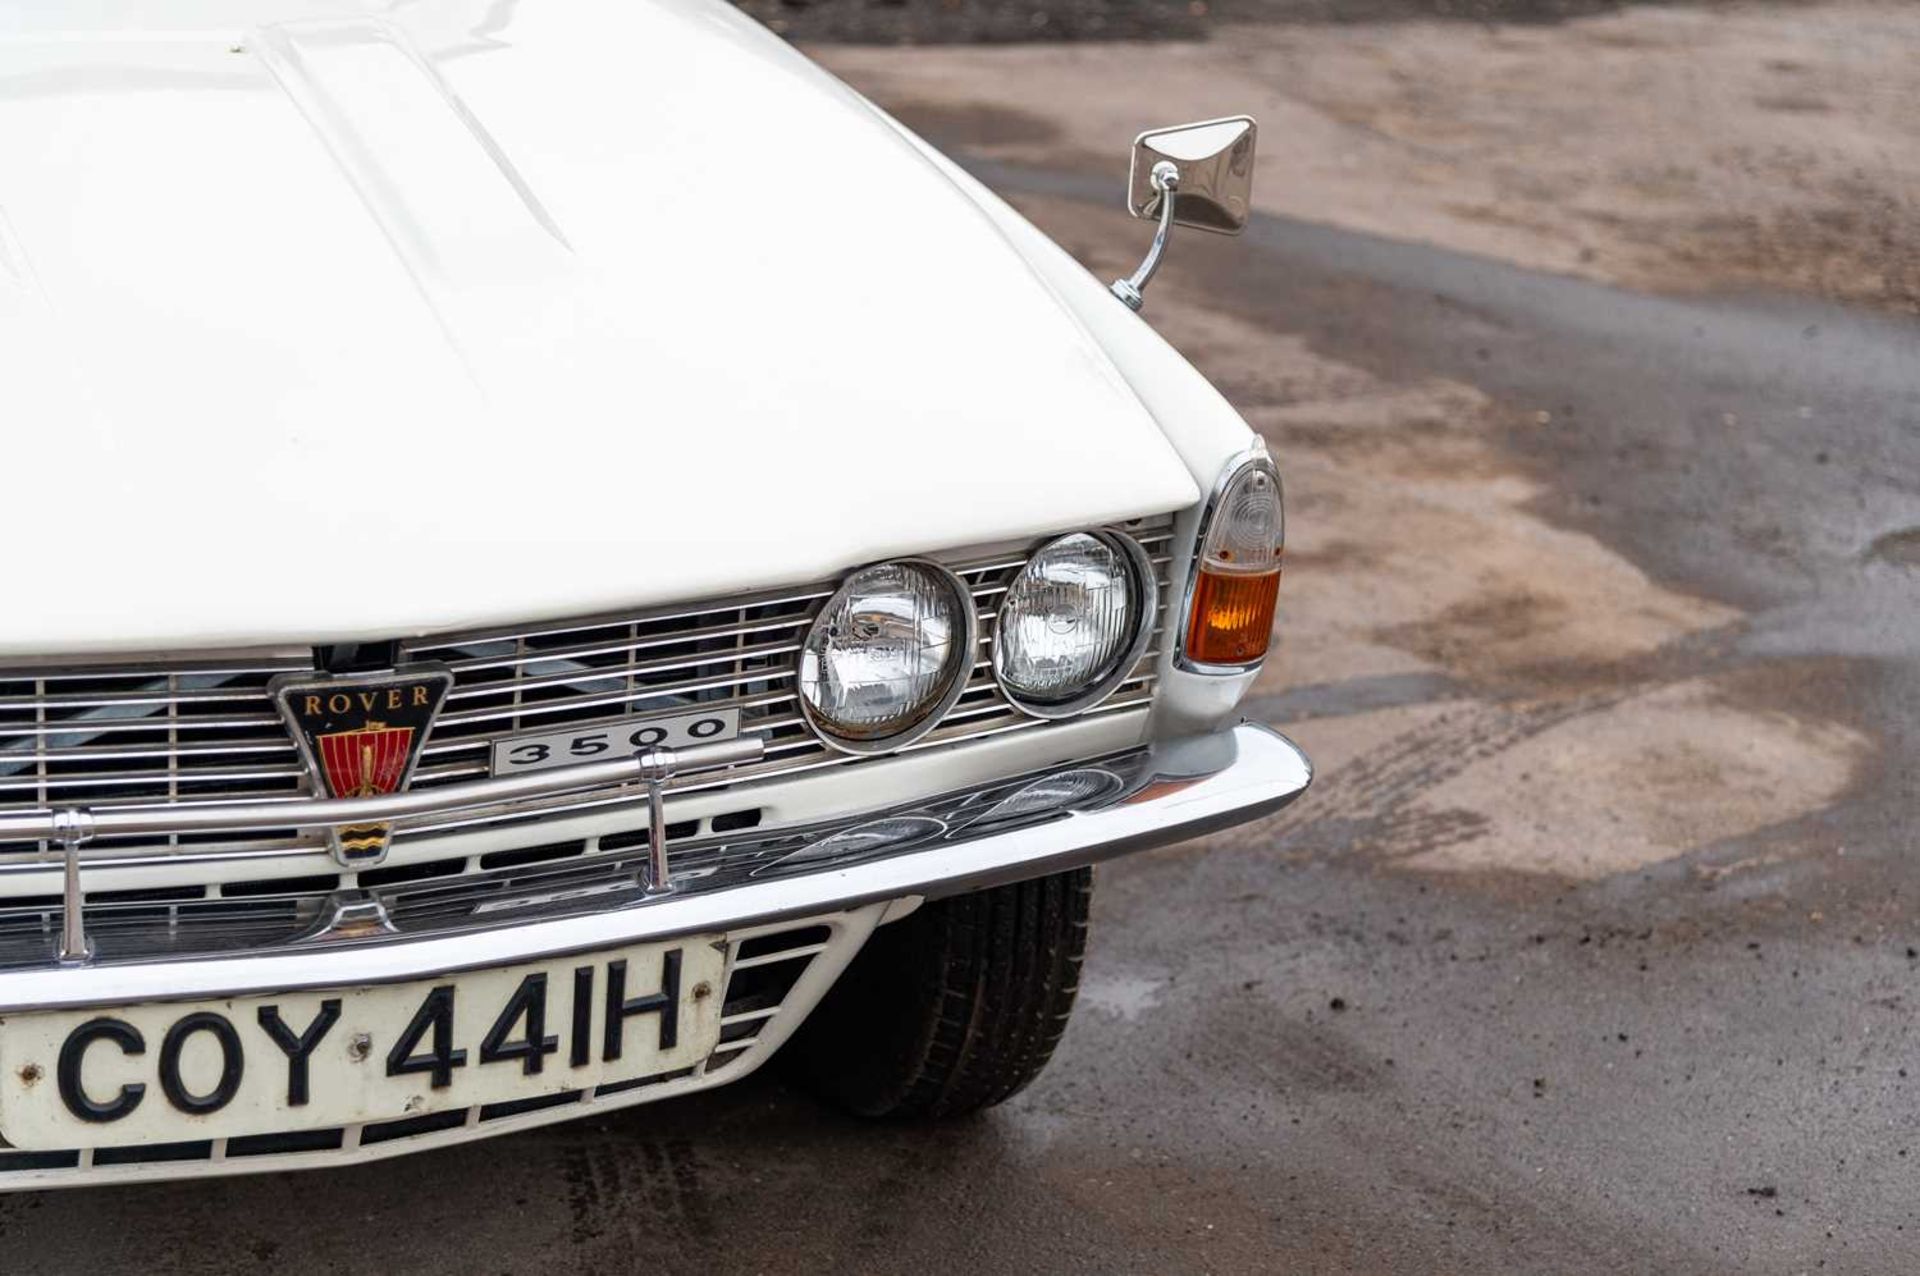 1969 Rover P6 3500 - Image 19 of 71